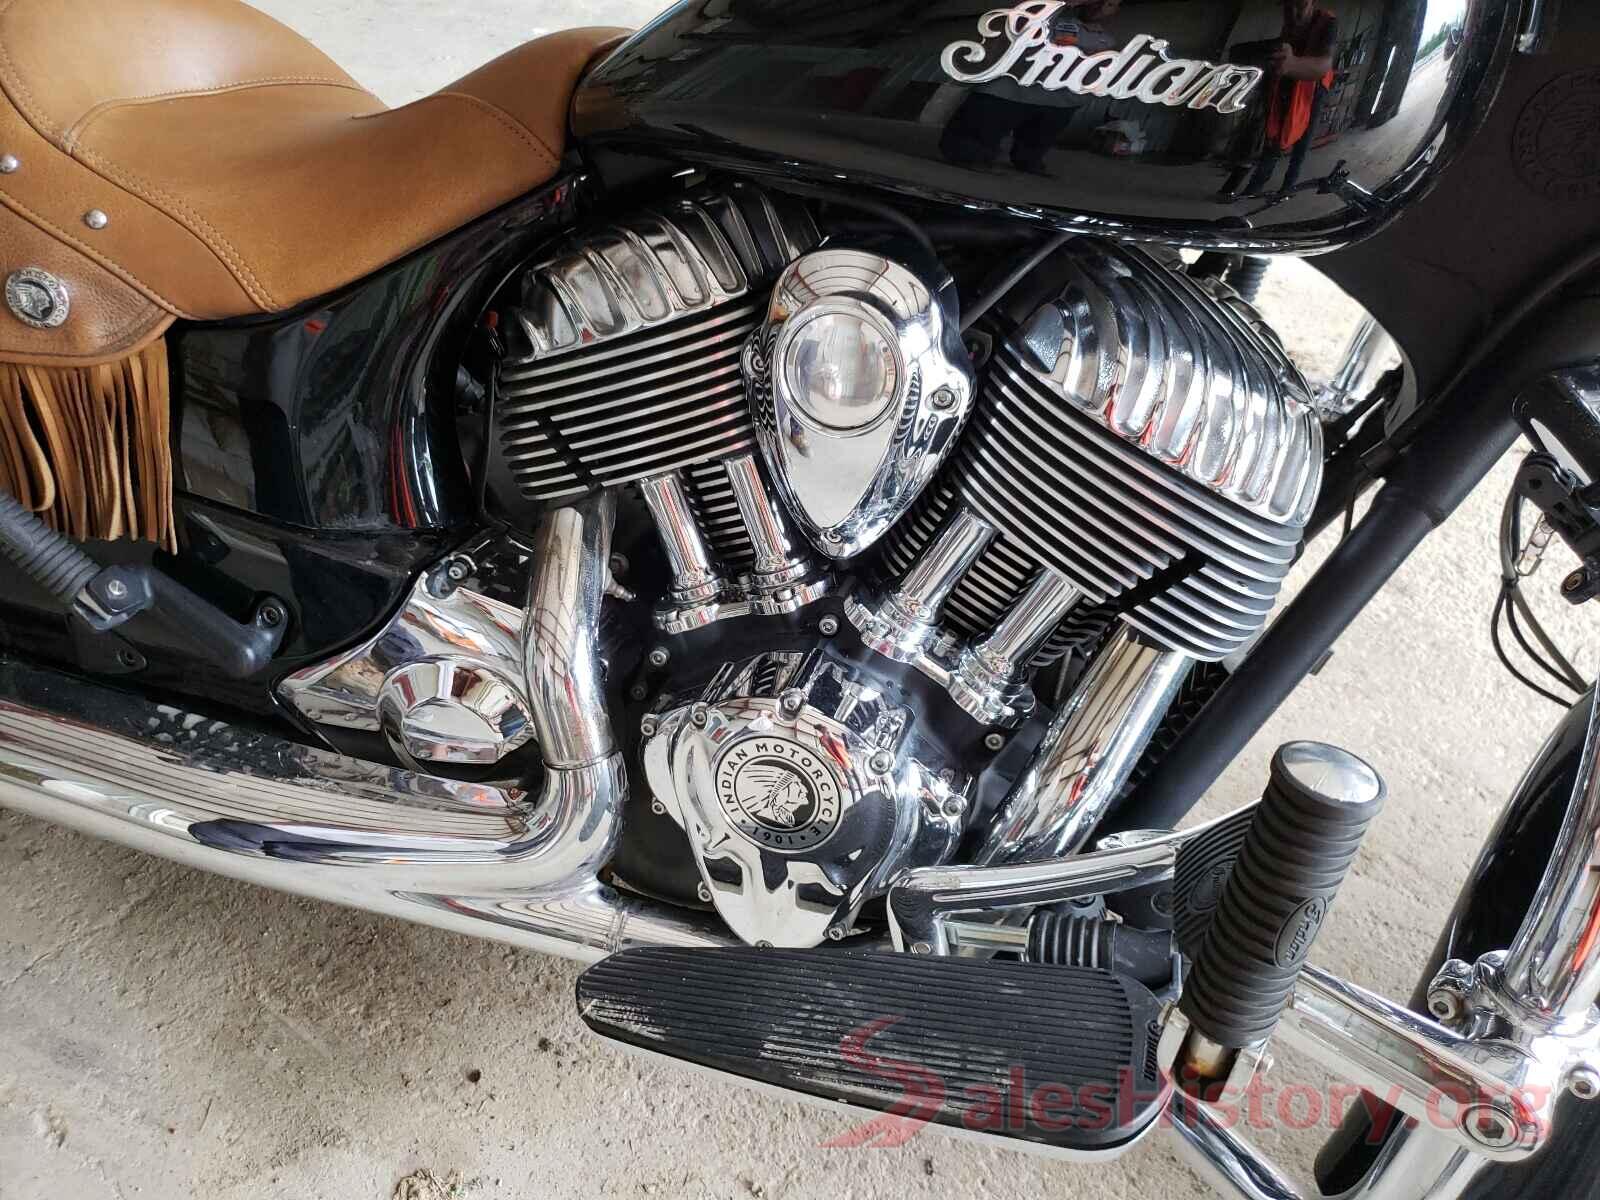 56KCCVAA5F3326807 2015 INDIAN MOTORCYCLE CO. MOTORCYCLE